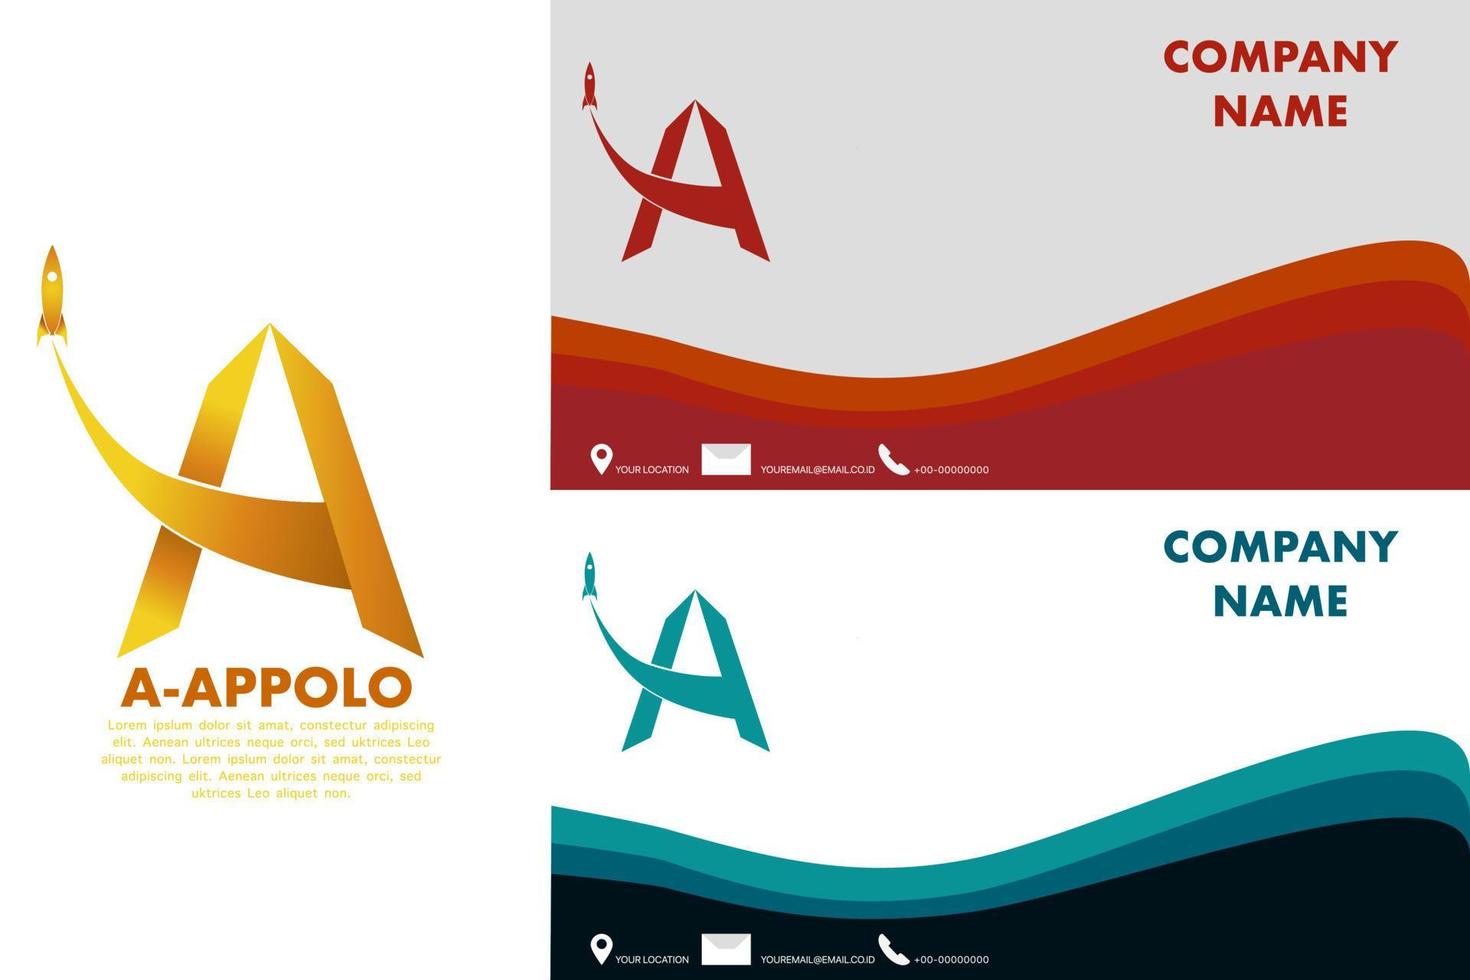 A-apollo logo with rocket launch icon for business card guild company logo as identification vector